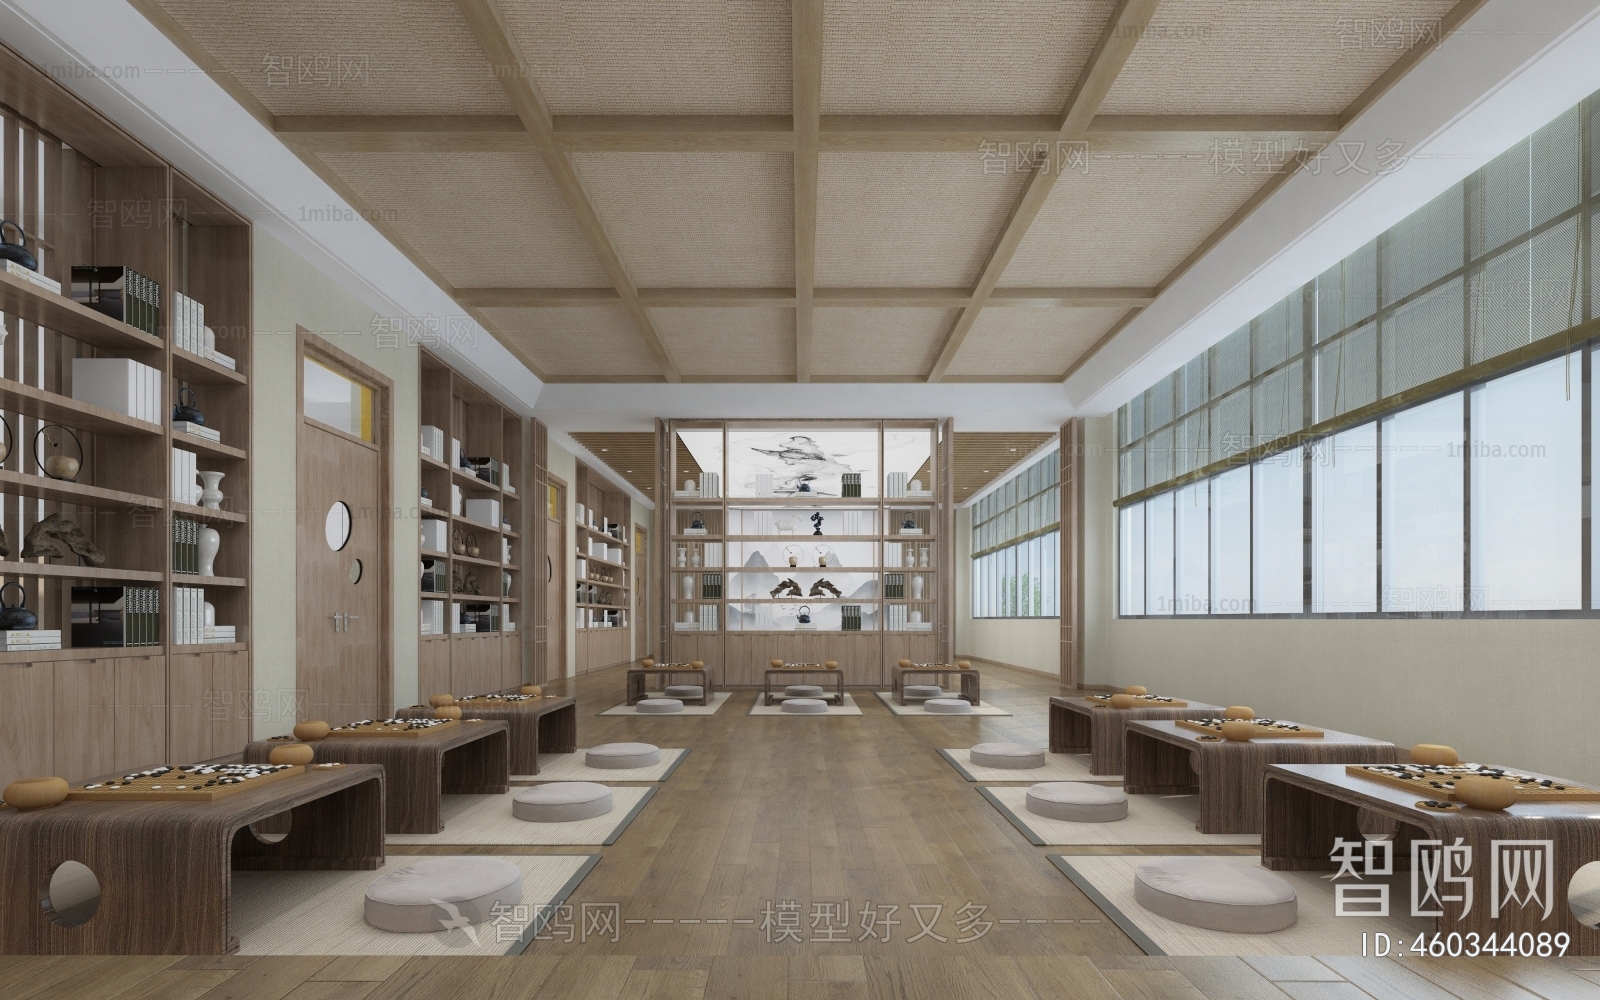 New Chinese Style School Classrooms